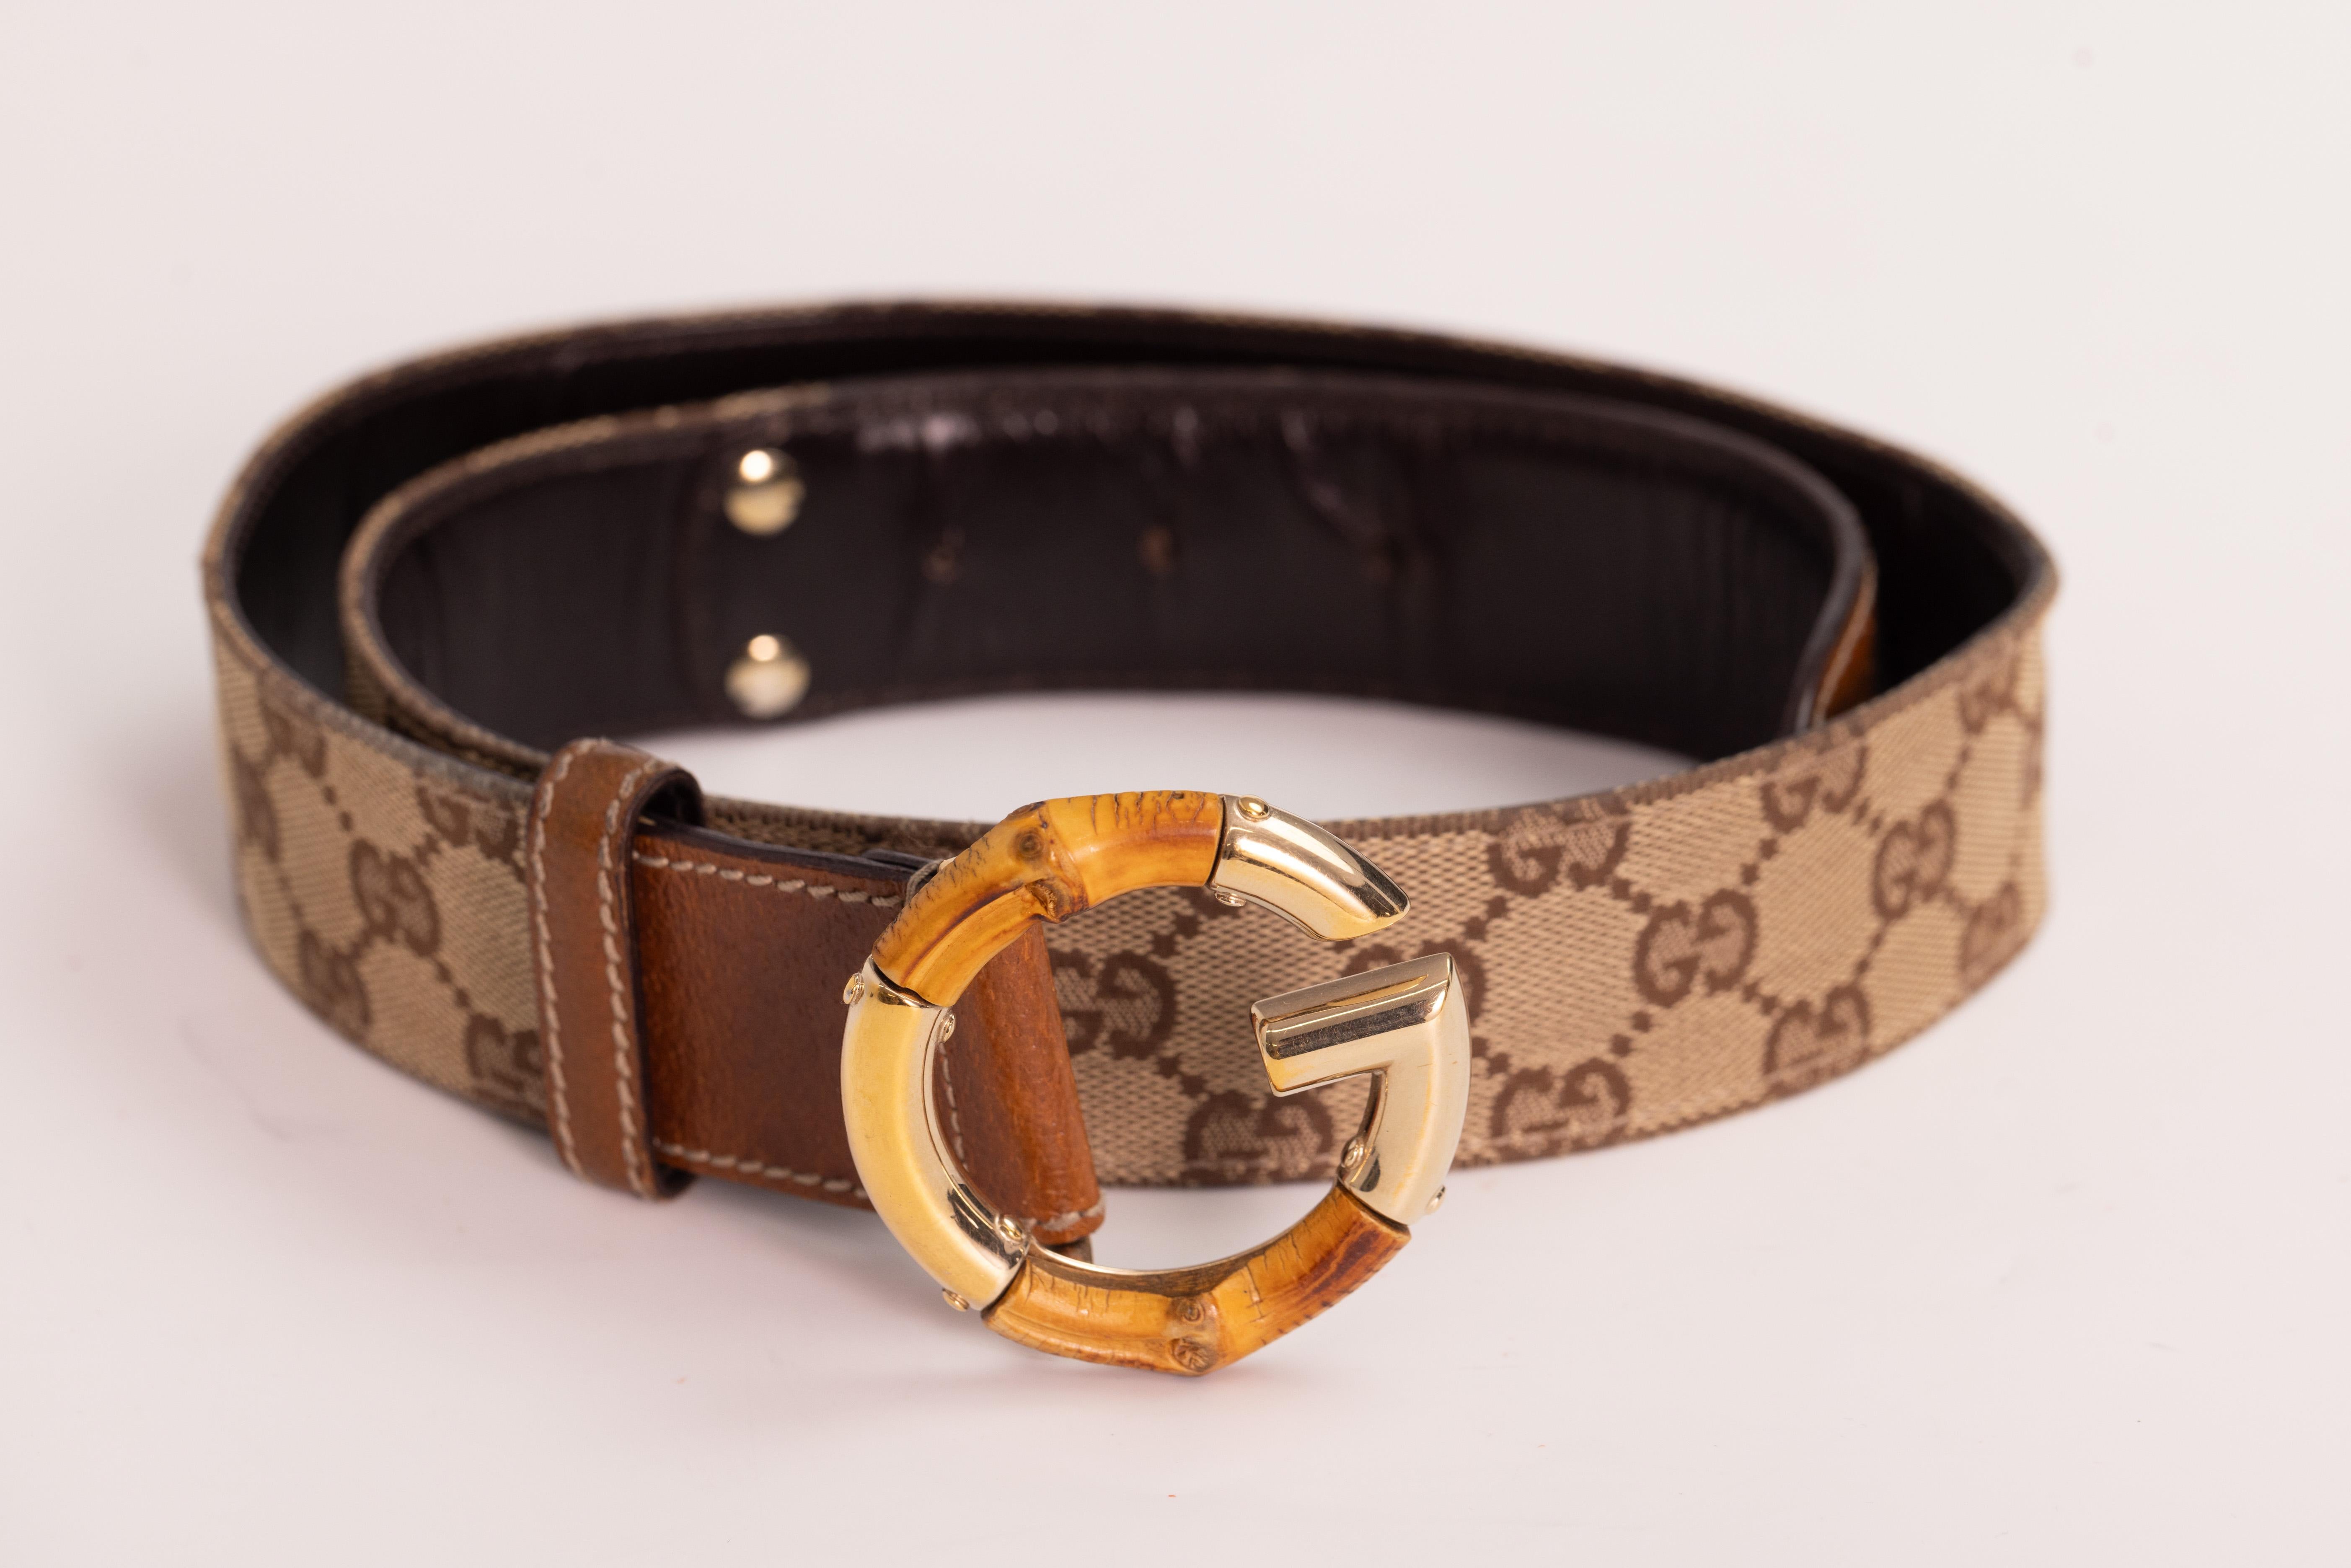 This Gucci belt features monogram print on canvas, leather details, a bamboo logo G buckle and brass accents.

Color: Ebony GG monogram
Material: Canvas with bamboo accents
Model No.: 138456
Measures: L 36” x W 1.5”
Size: 80 cm / 32 inch
Comes With: